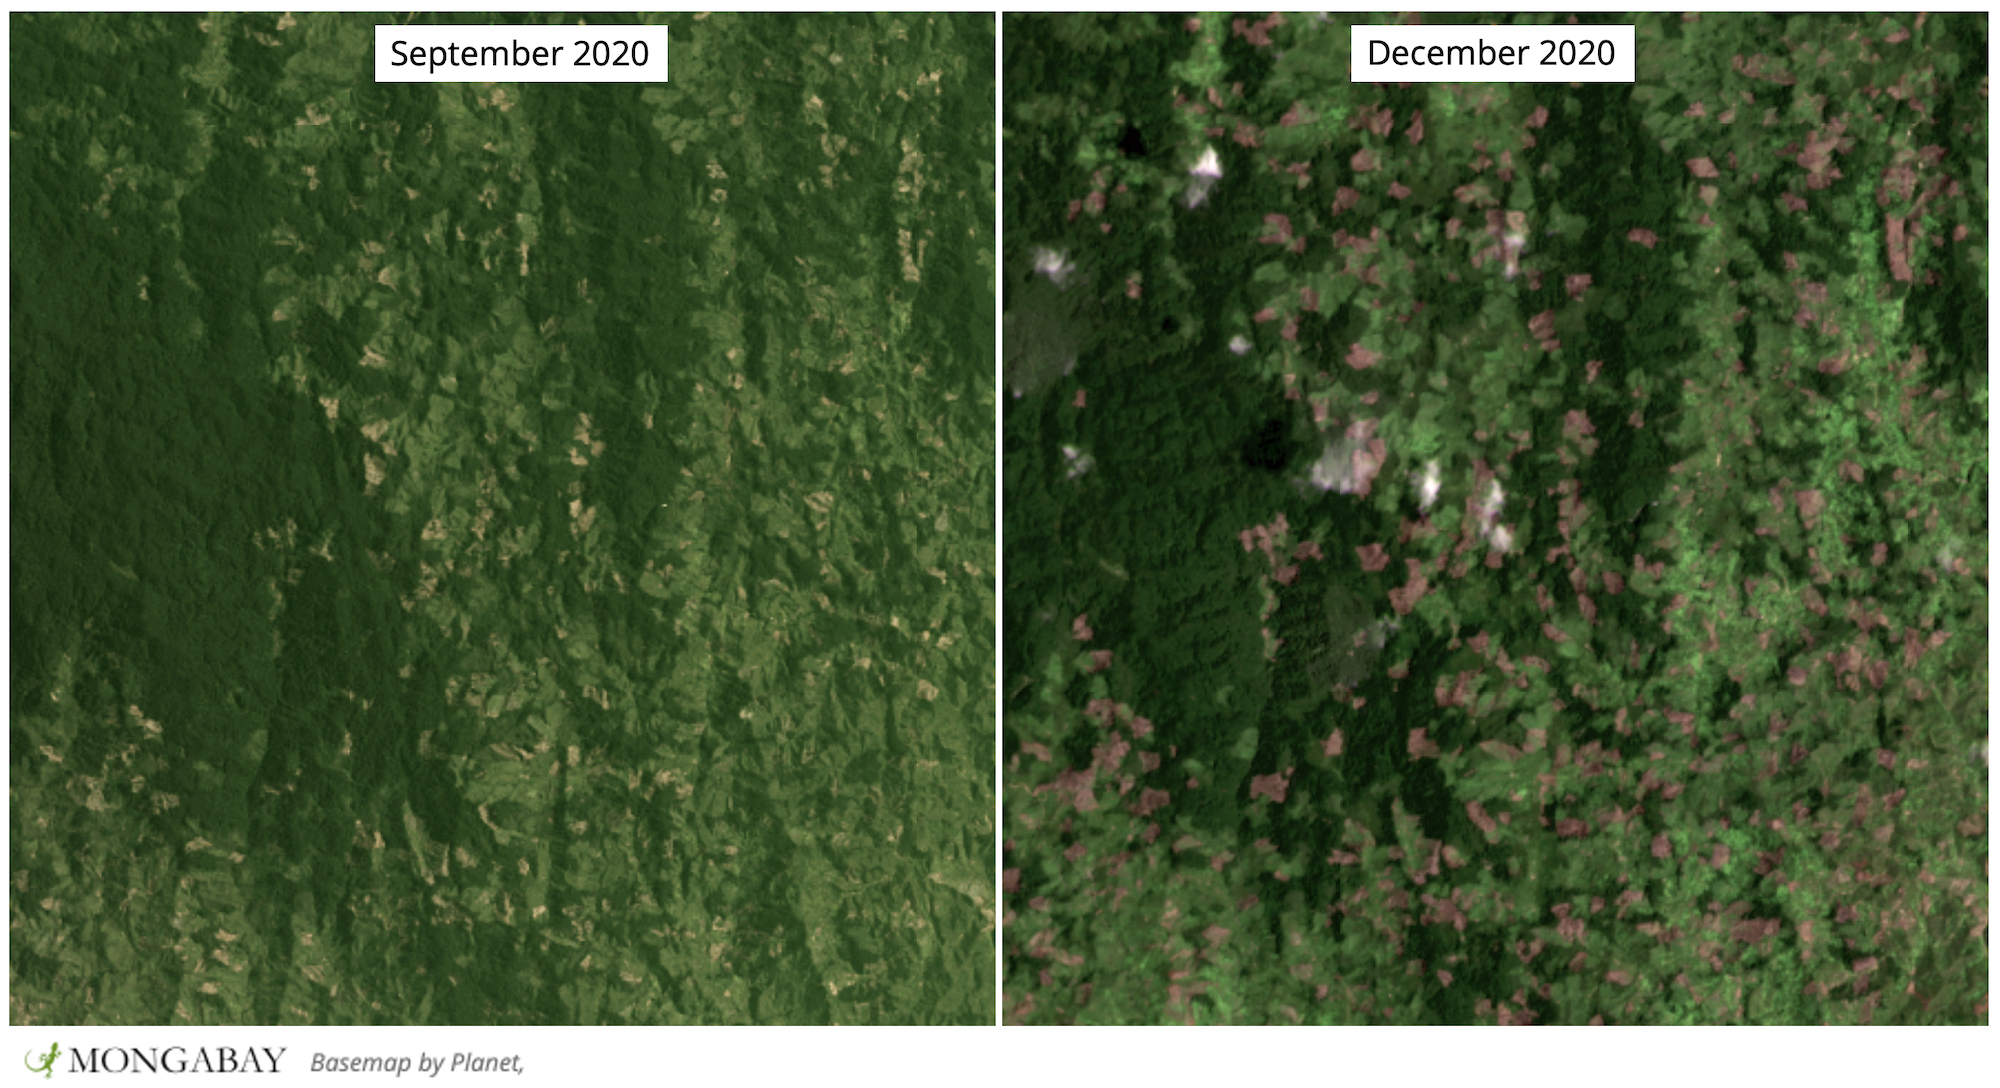 Satellite imagery show rapid deforestation in CAZ in late 2020.